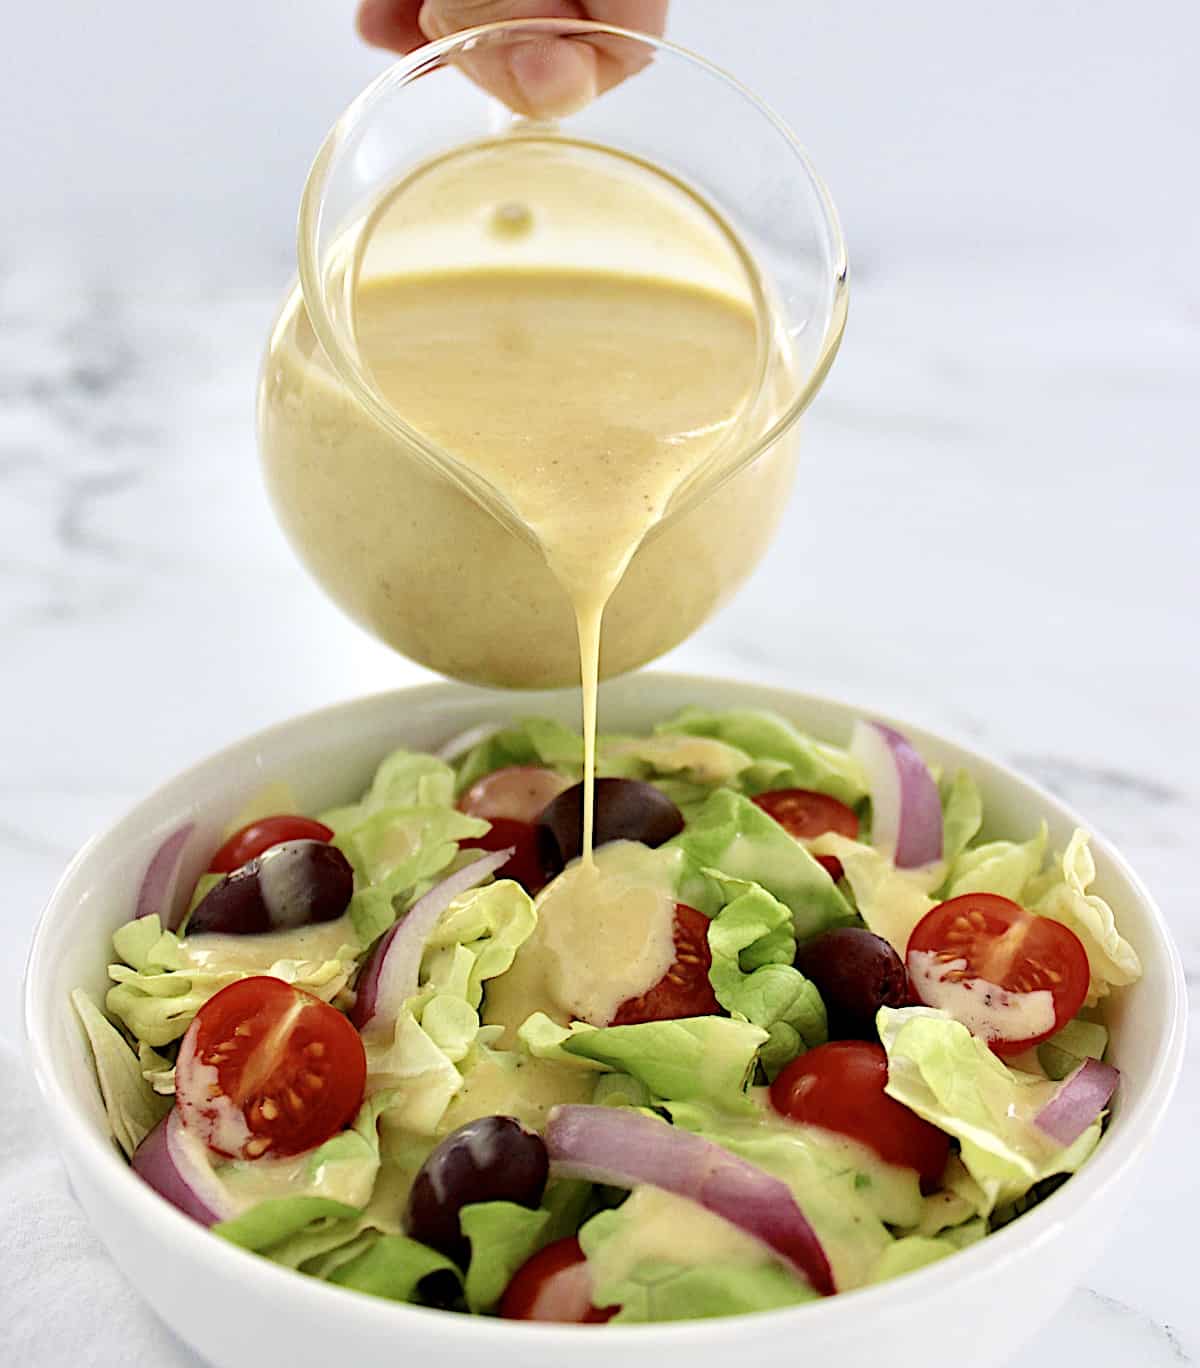 Honey Mustard Dressing being poured over salad in white bowl